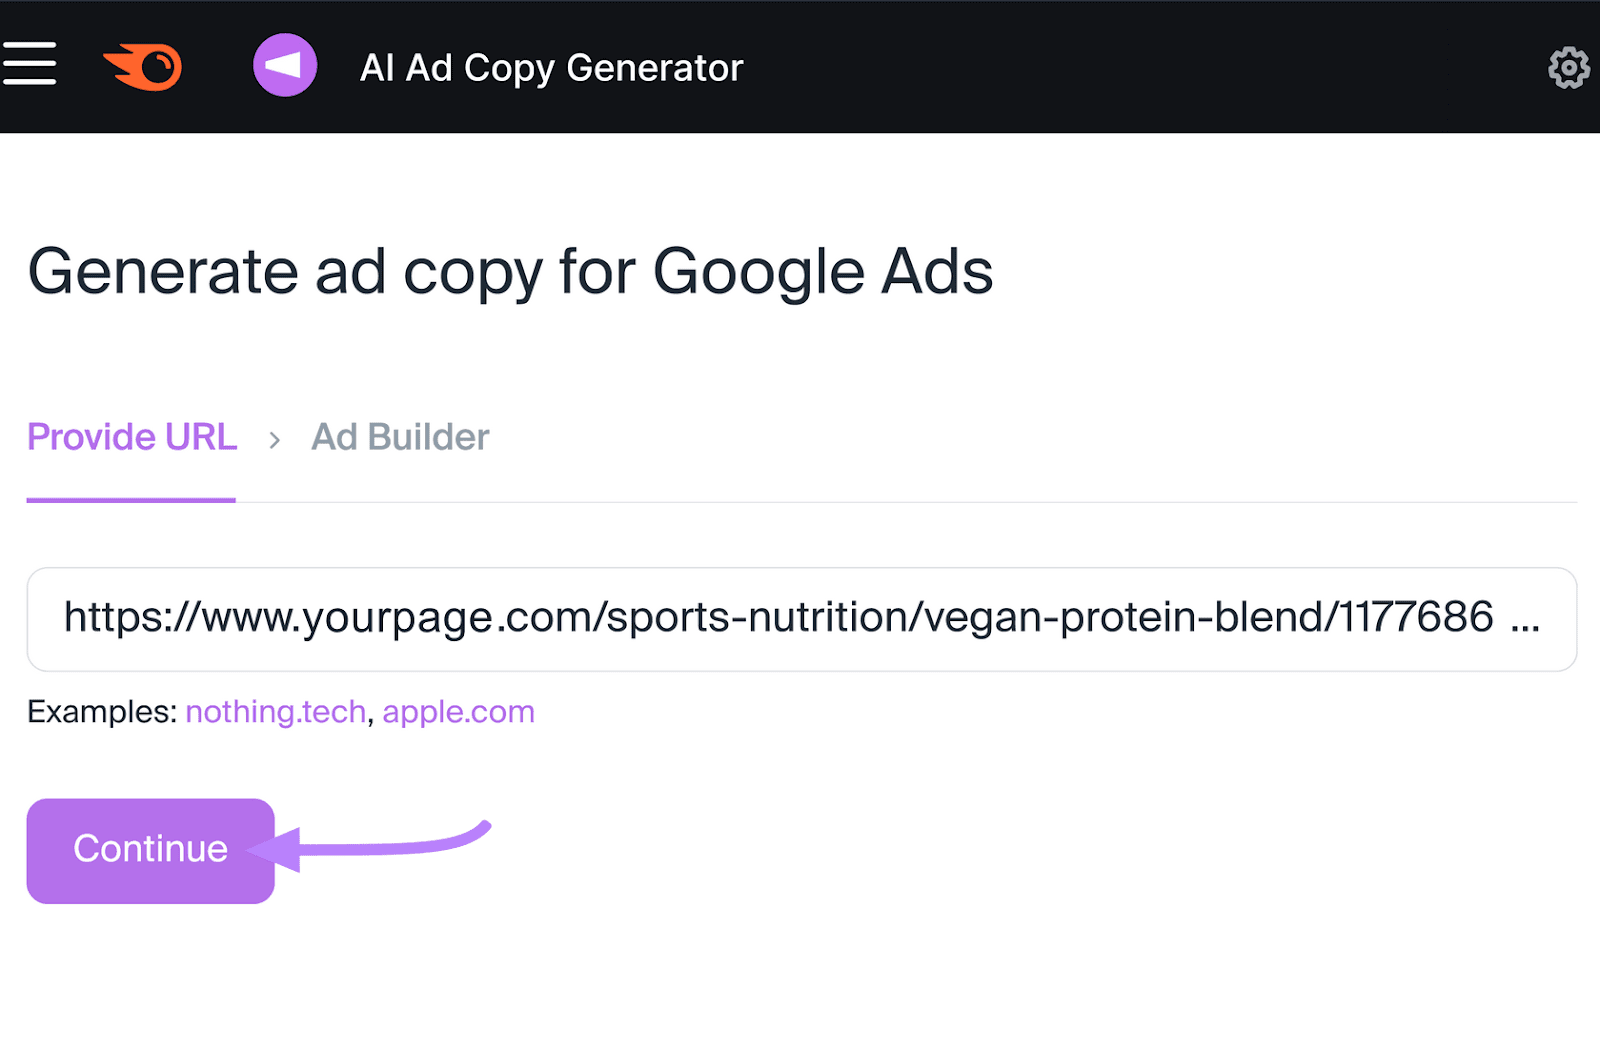 A landing page URL entered into the AI Ad Copy Generator